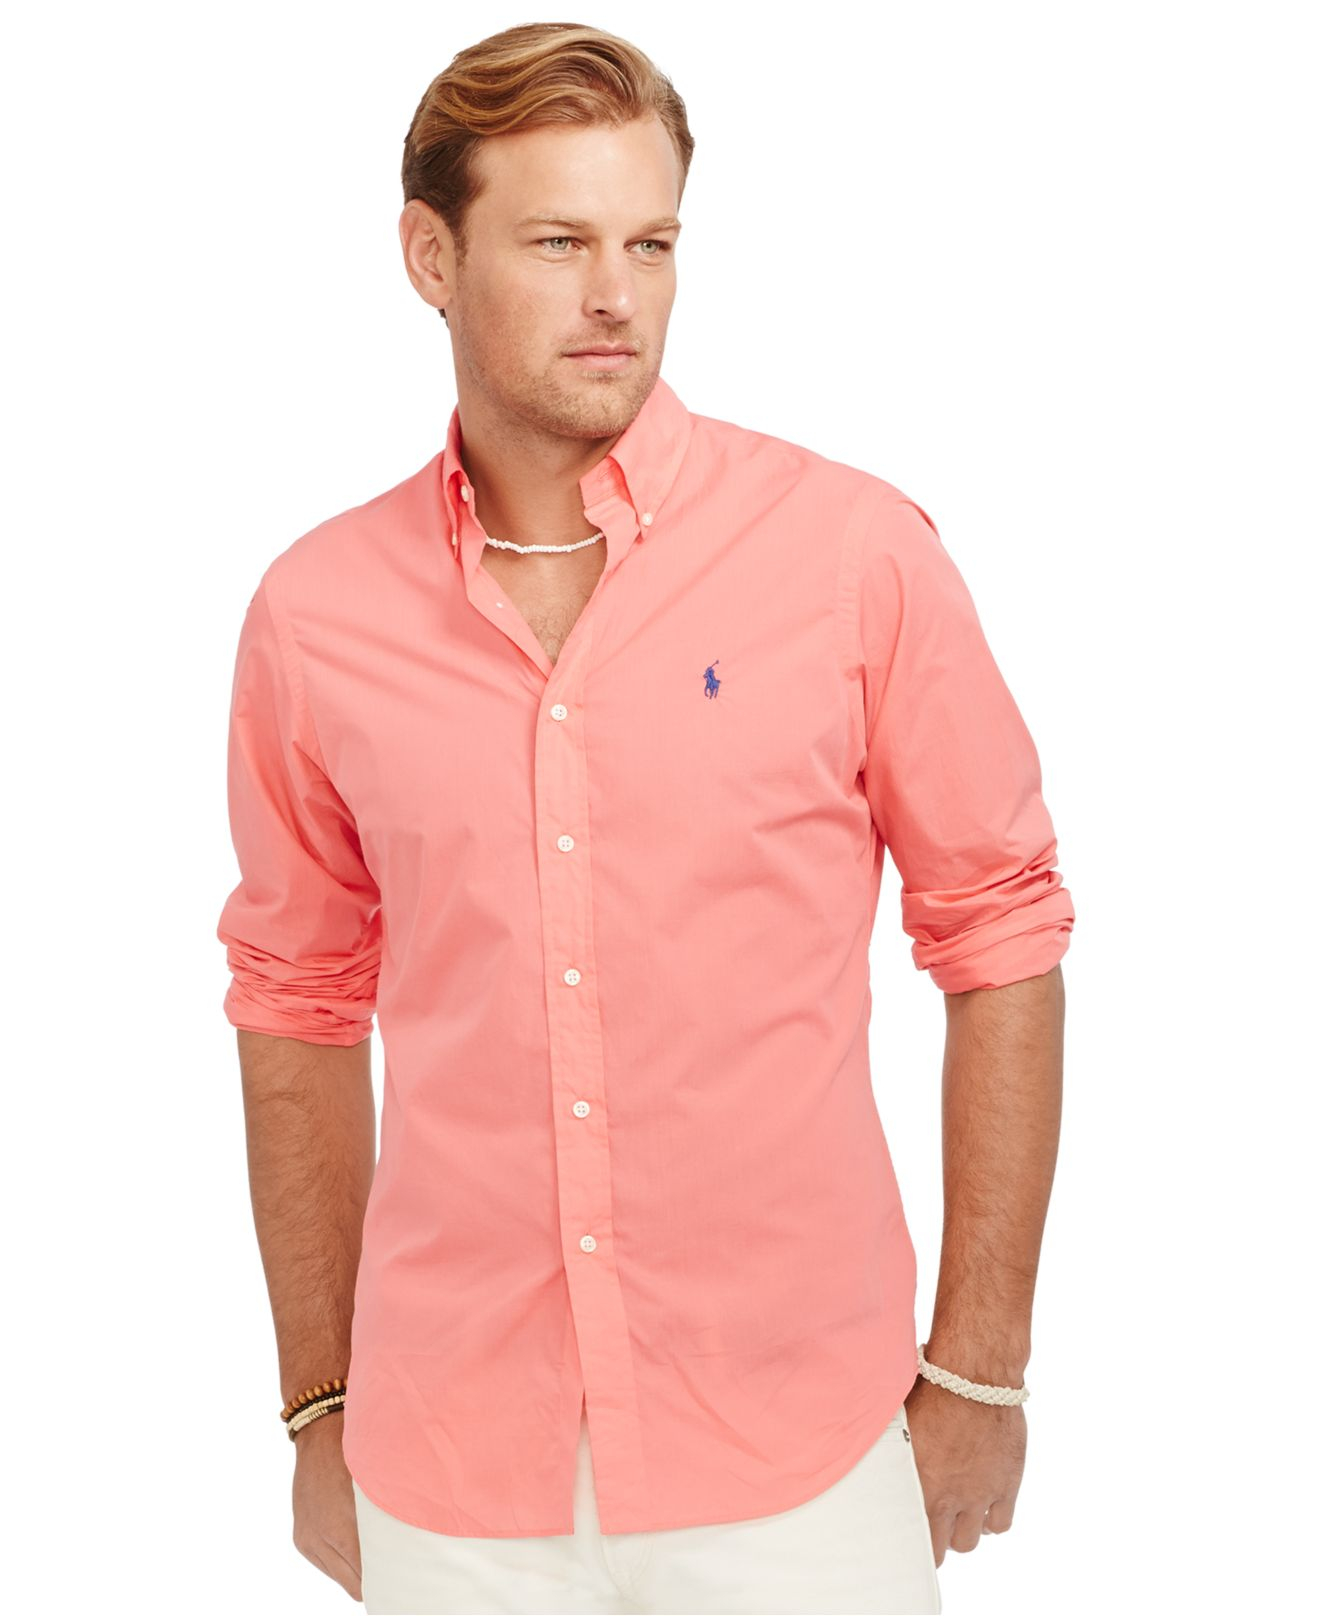 Lyst - Polo ralph lauren Big And Tall Classic-fit Poplin Shirt in Red ...